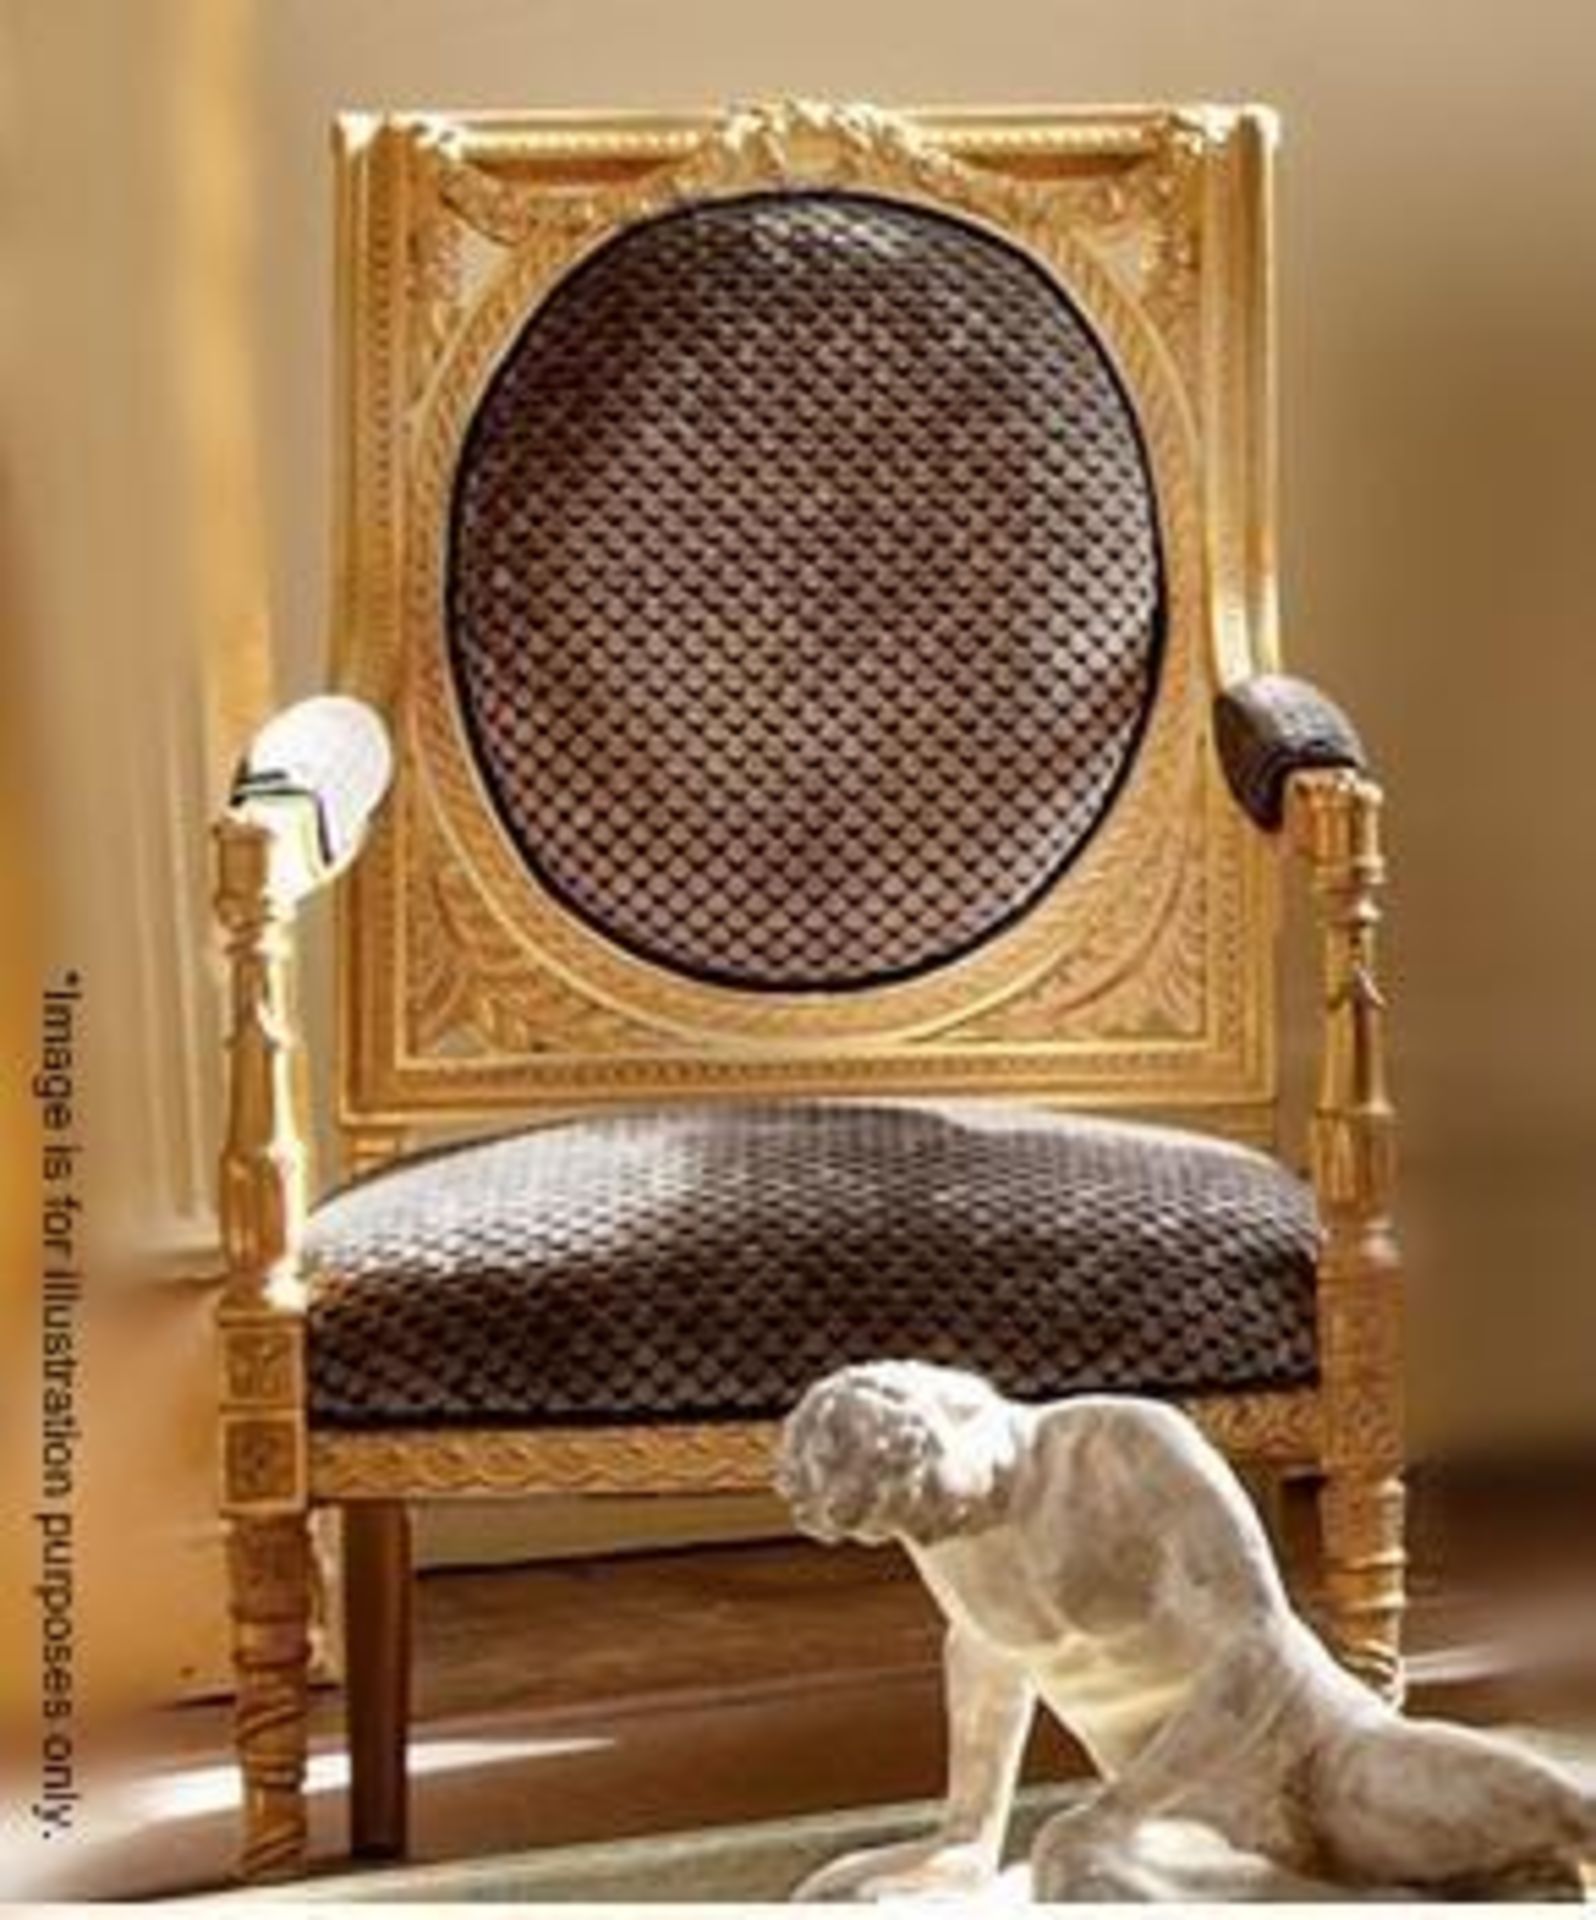 1 x DURESTA Flavia Chair - Features A Hand-Carved Hard Wood Frame With Hand-Stitched Coil Sprung Sea - Image 15 of 16